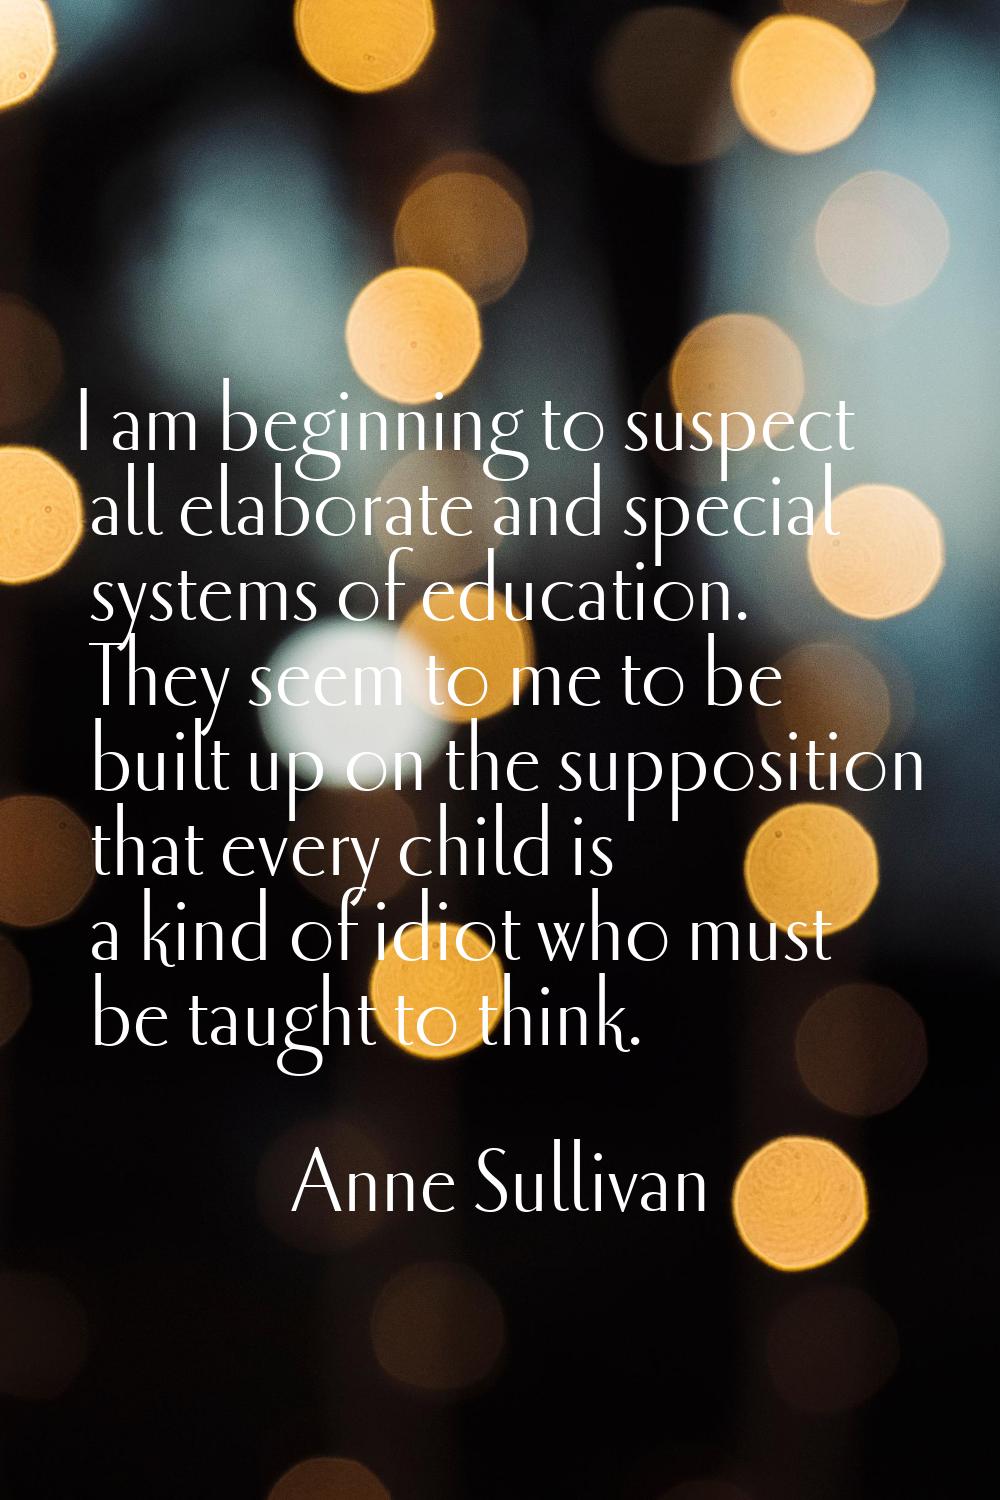 I am beginning to suspect all elaborate and special systems of education. They seem to me to be bui